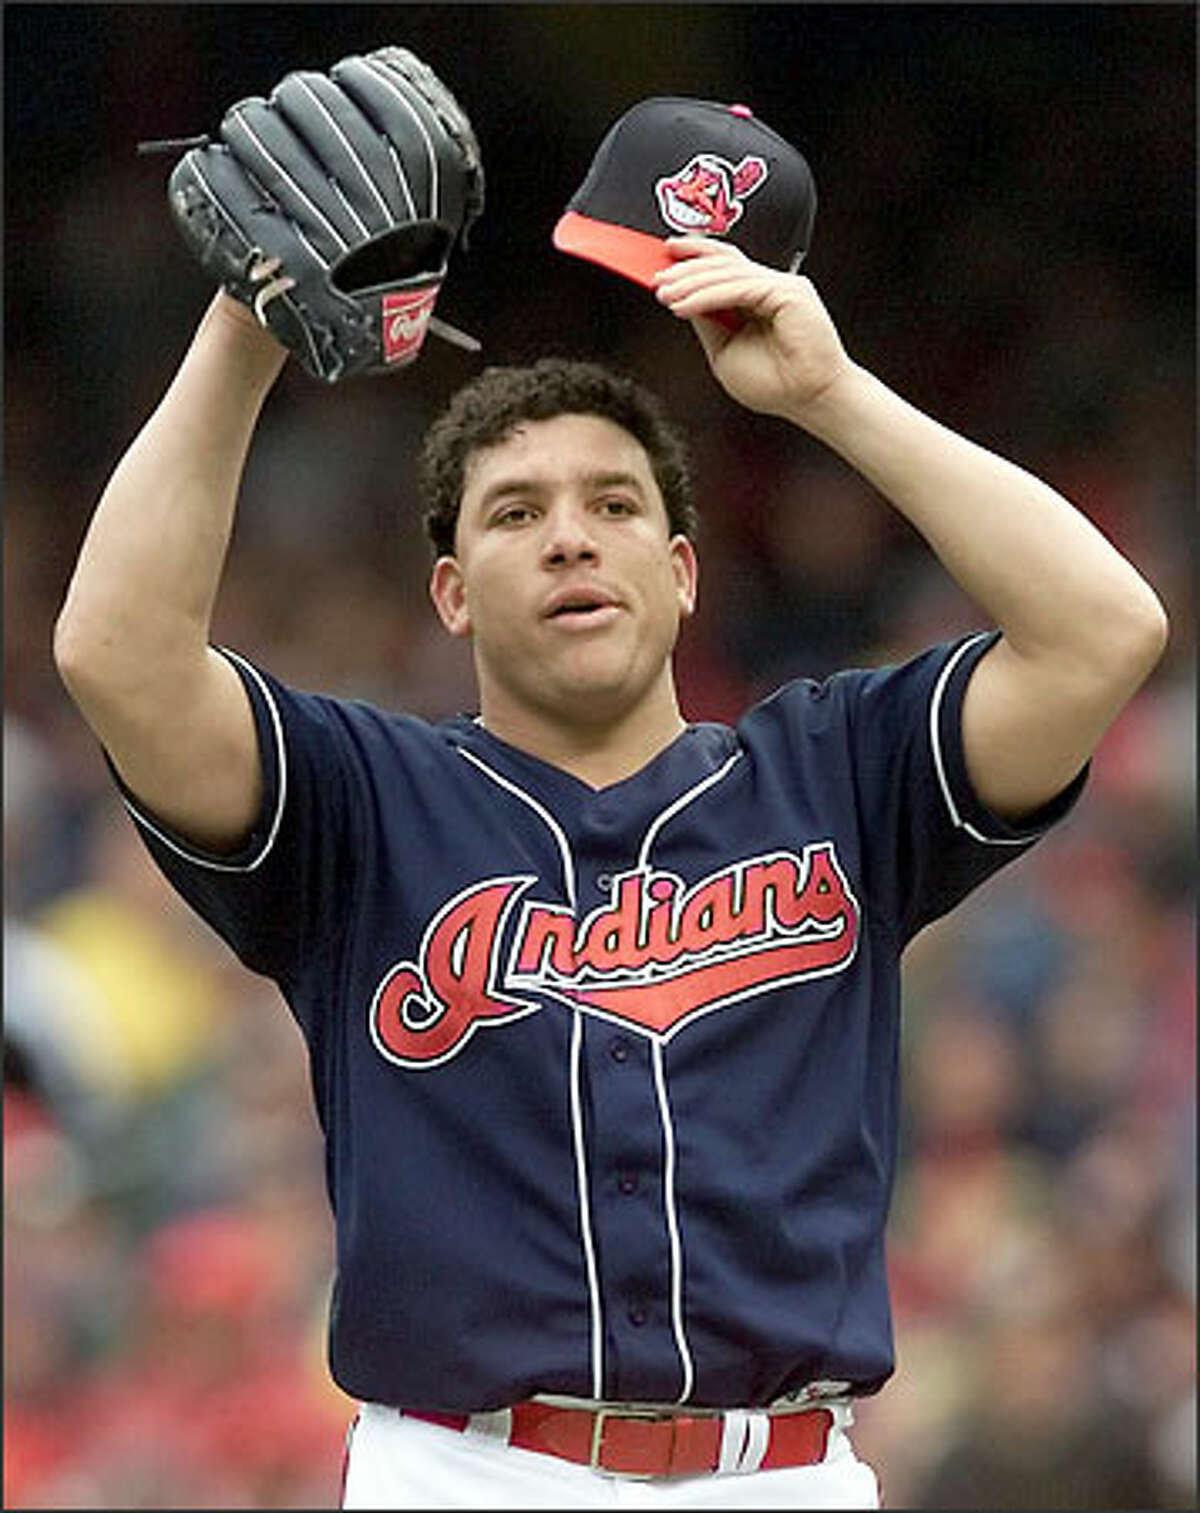 Cleveland starter Bartolo Colon pitched eight shutout innings against the Mariners earlier in the series. Today, he gave up three runs while struggling mightily in the seventh inning.